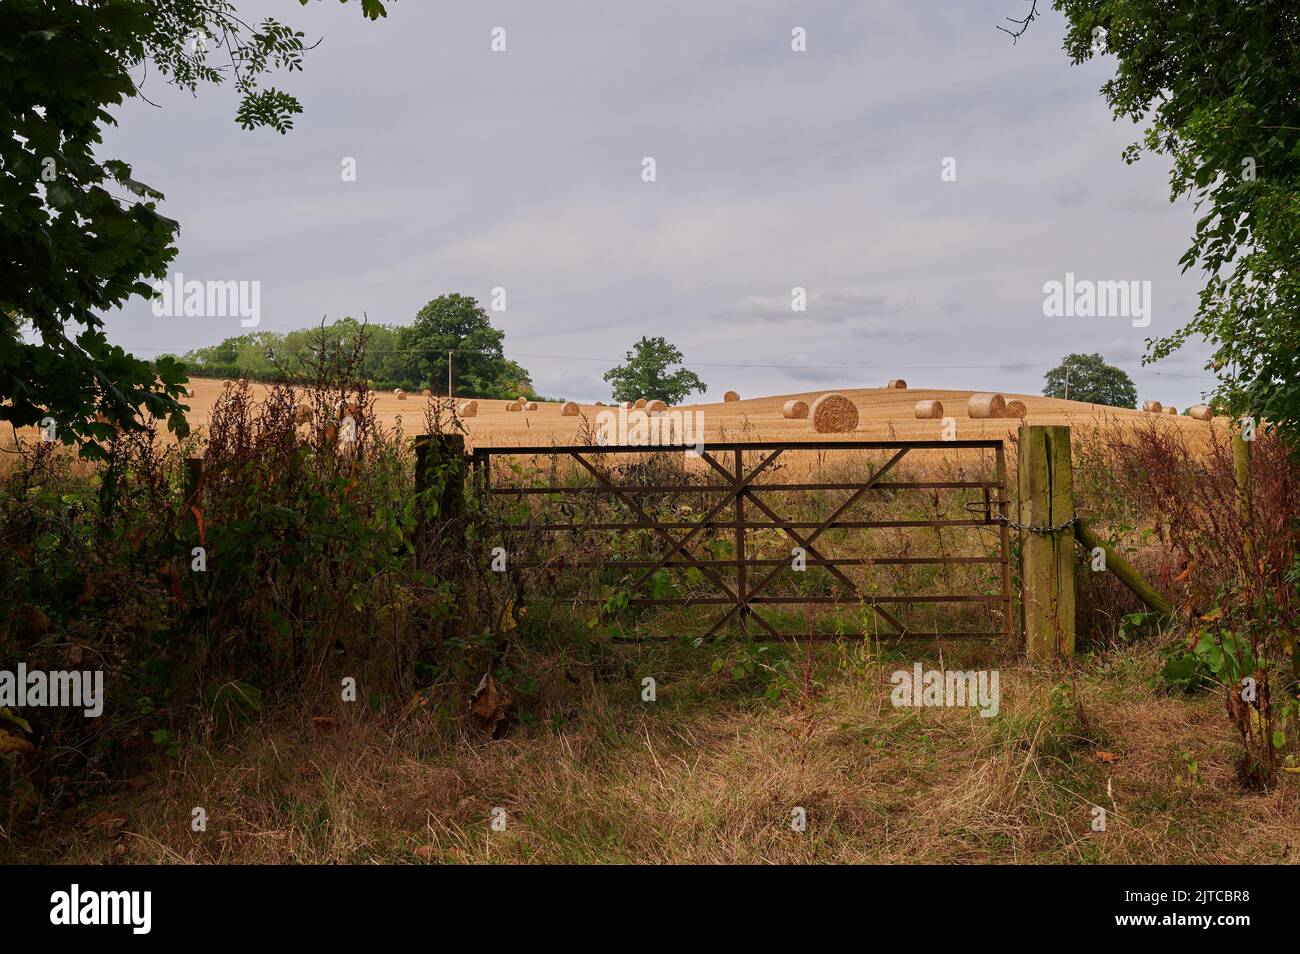 closed metal gate in hedgerow in english countryside in front of harvested wheat field and straw bales Stock Photo